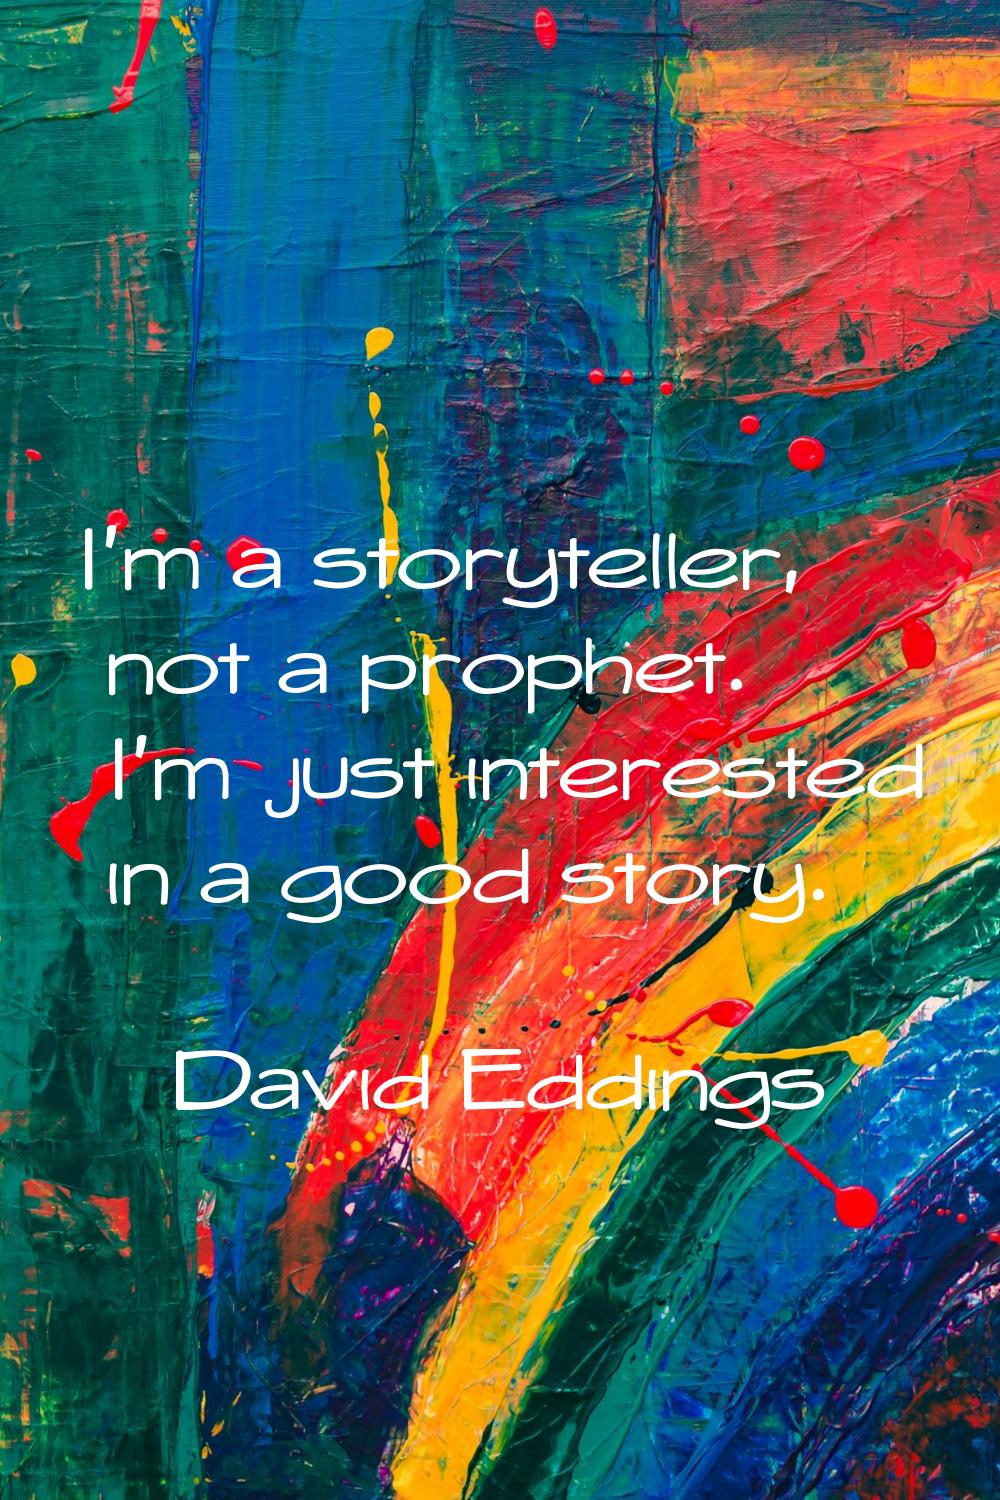 I'm a storyteller, not a prophet. I'm just interested in a good story.